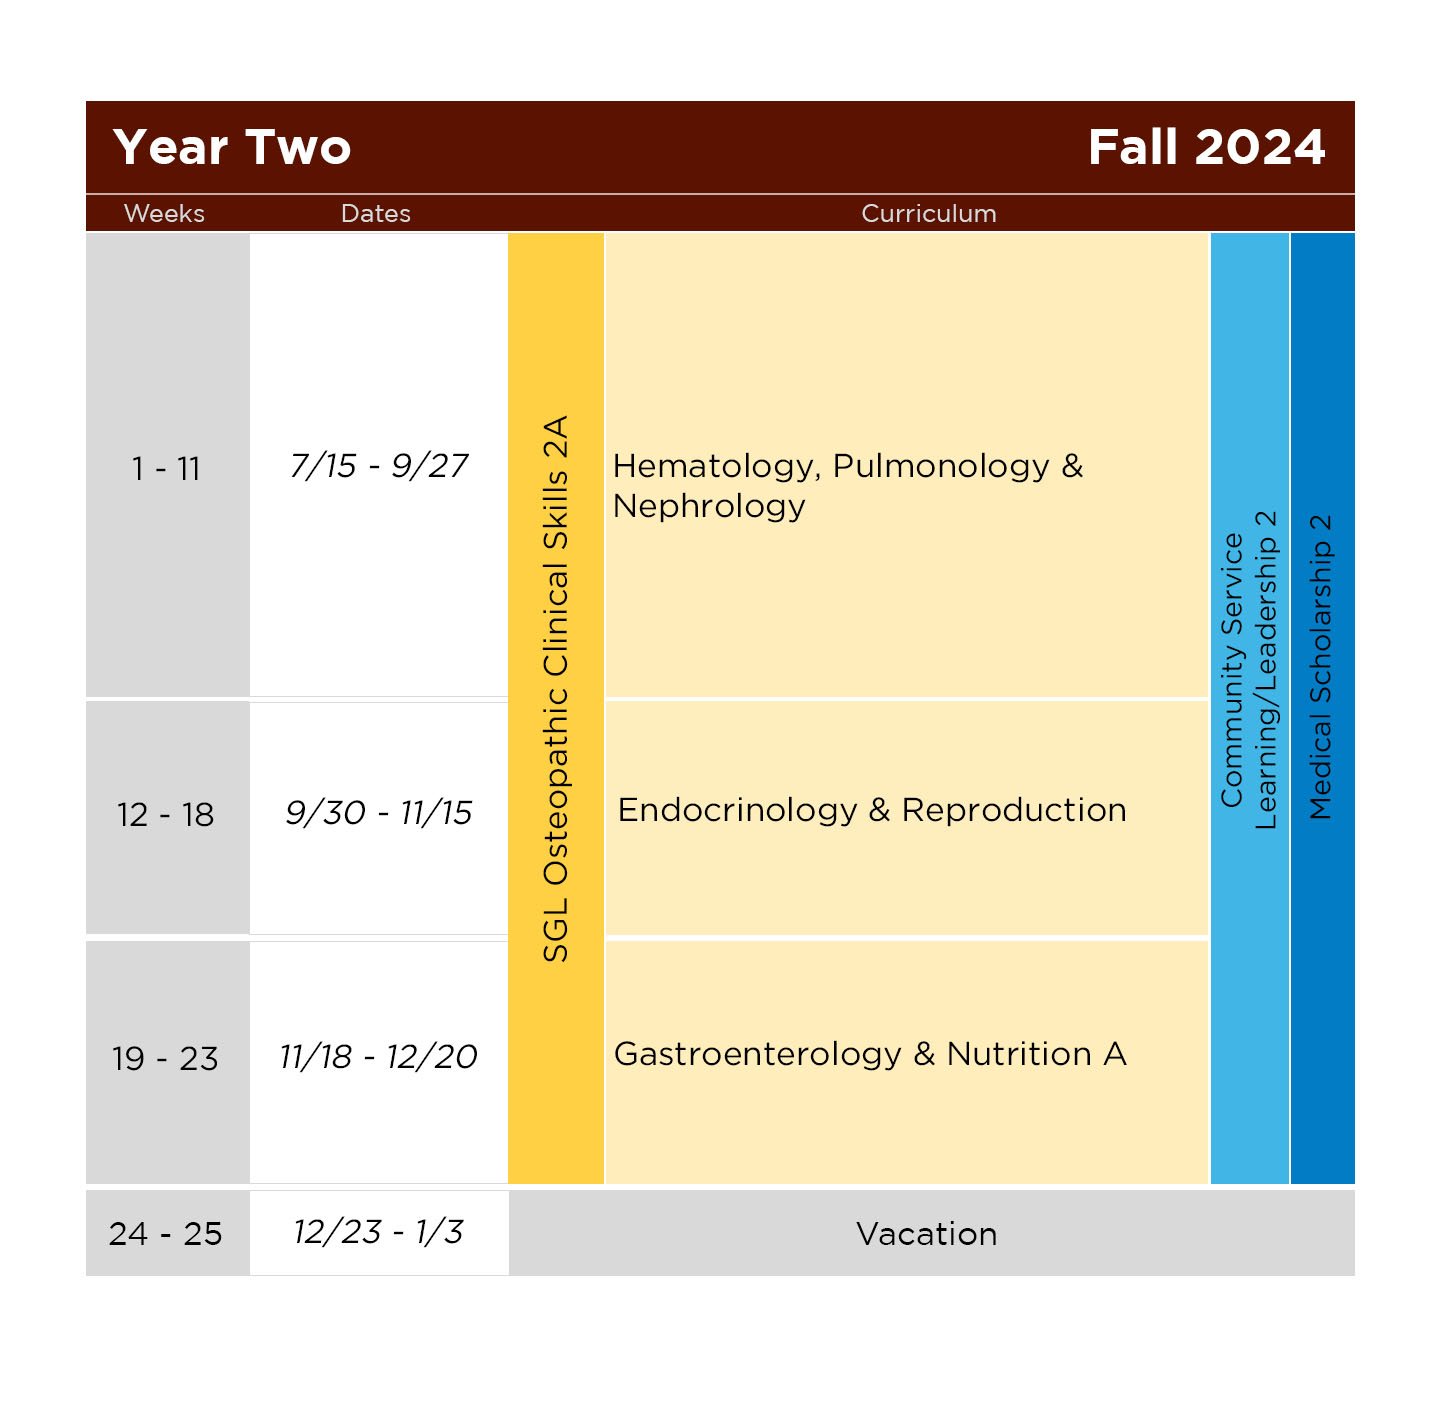 A sample schedule for Fall 2024 SGL Year Two